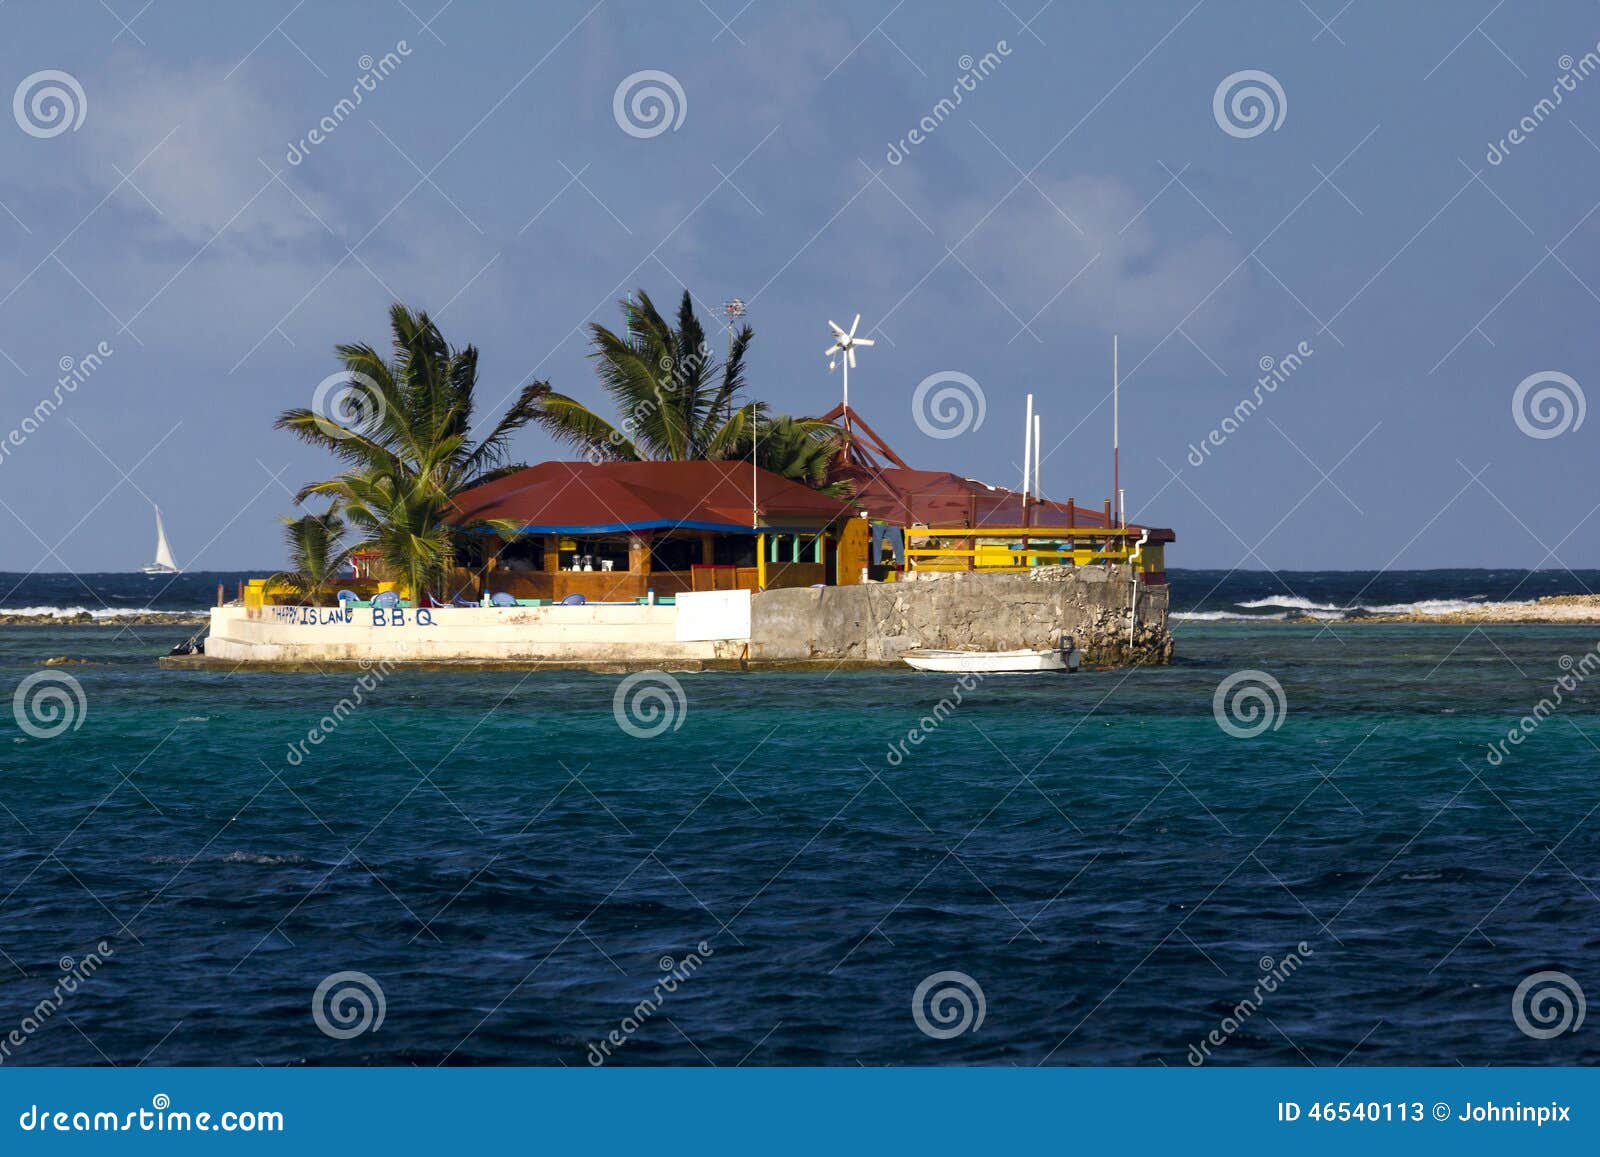 view of happy island, a tiny brightly coloured island restaurant with palm trees; the grenadines, eastern caribbean.